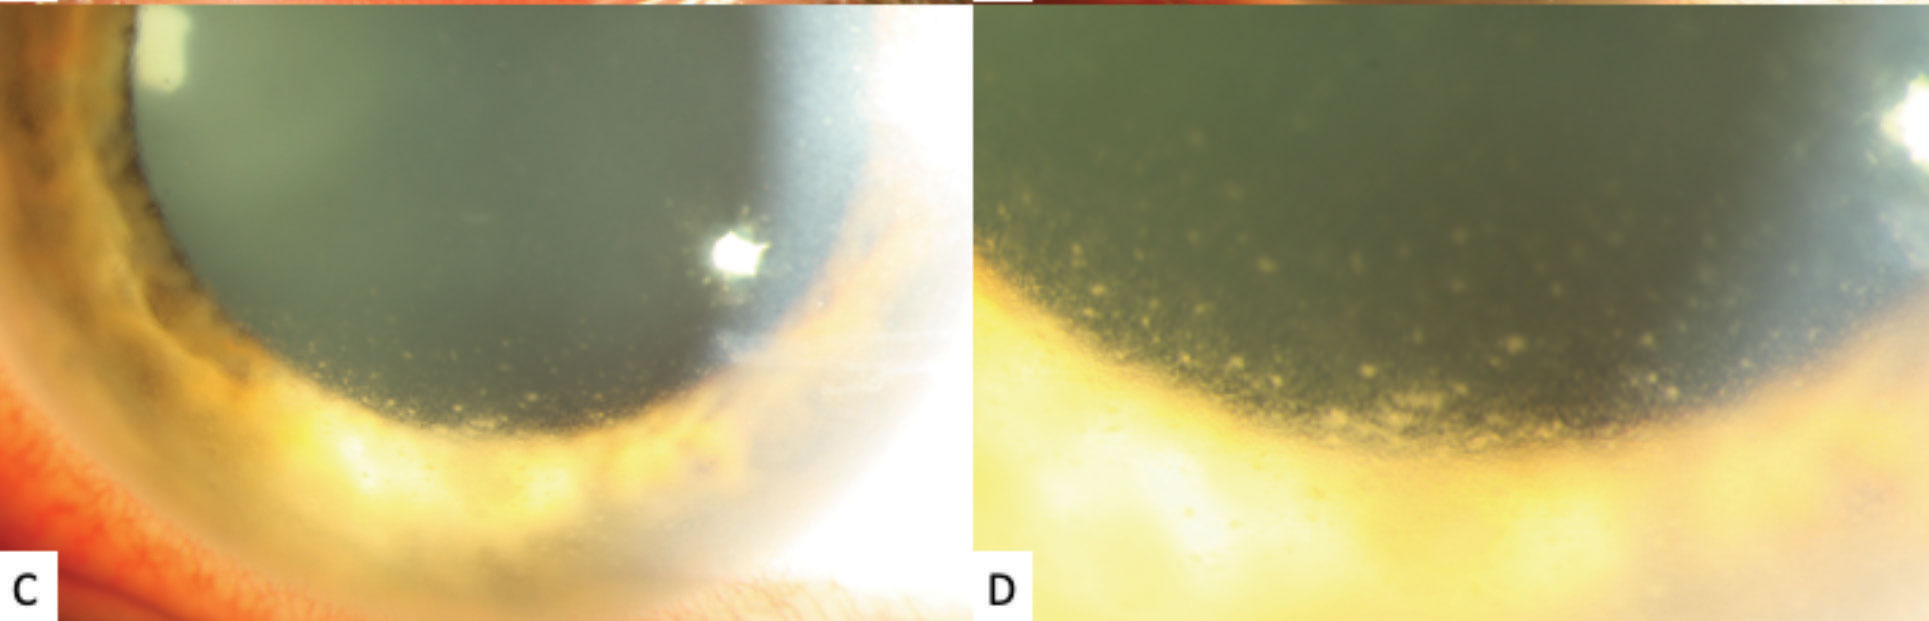 High-magnification slit lamp photographs of the left eye showing inferior stellate keratic precipitates on the lower half of the cornea.